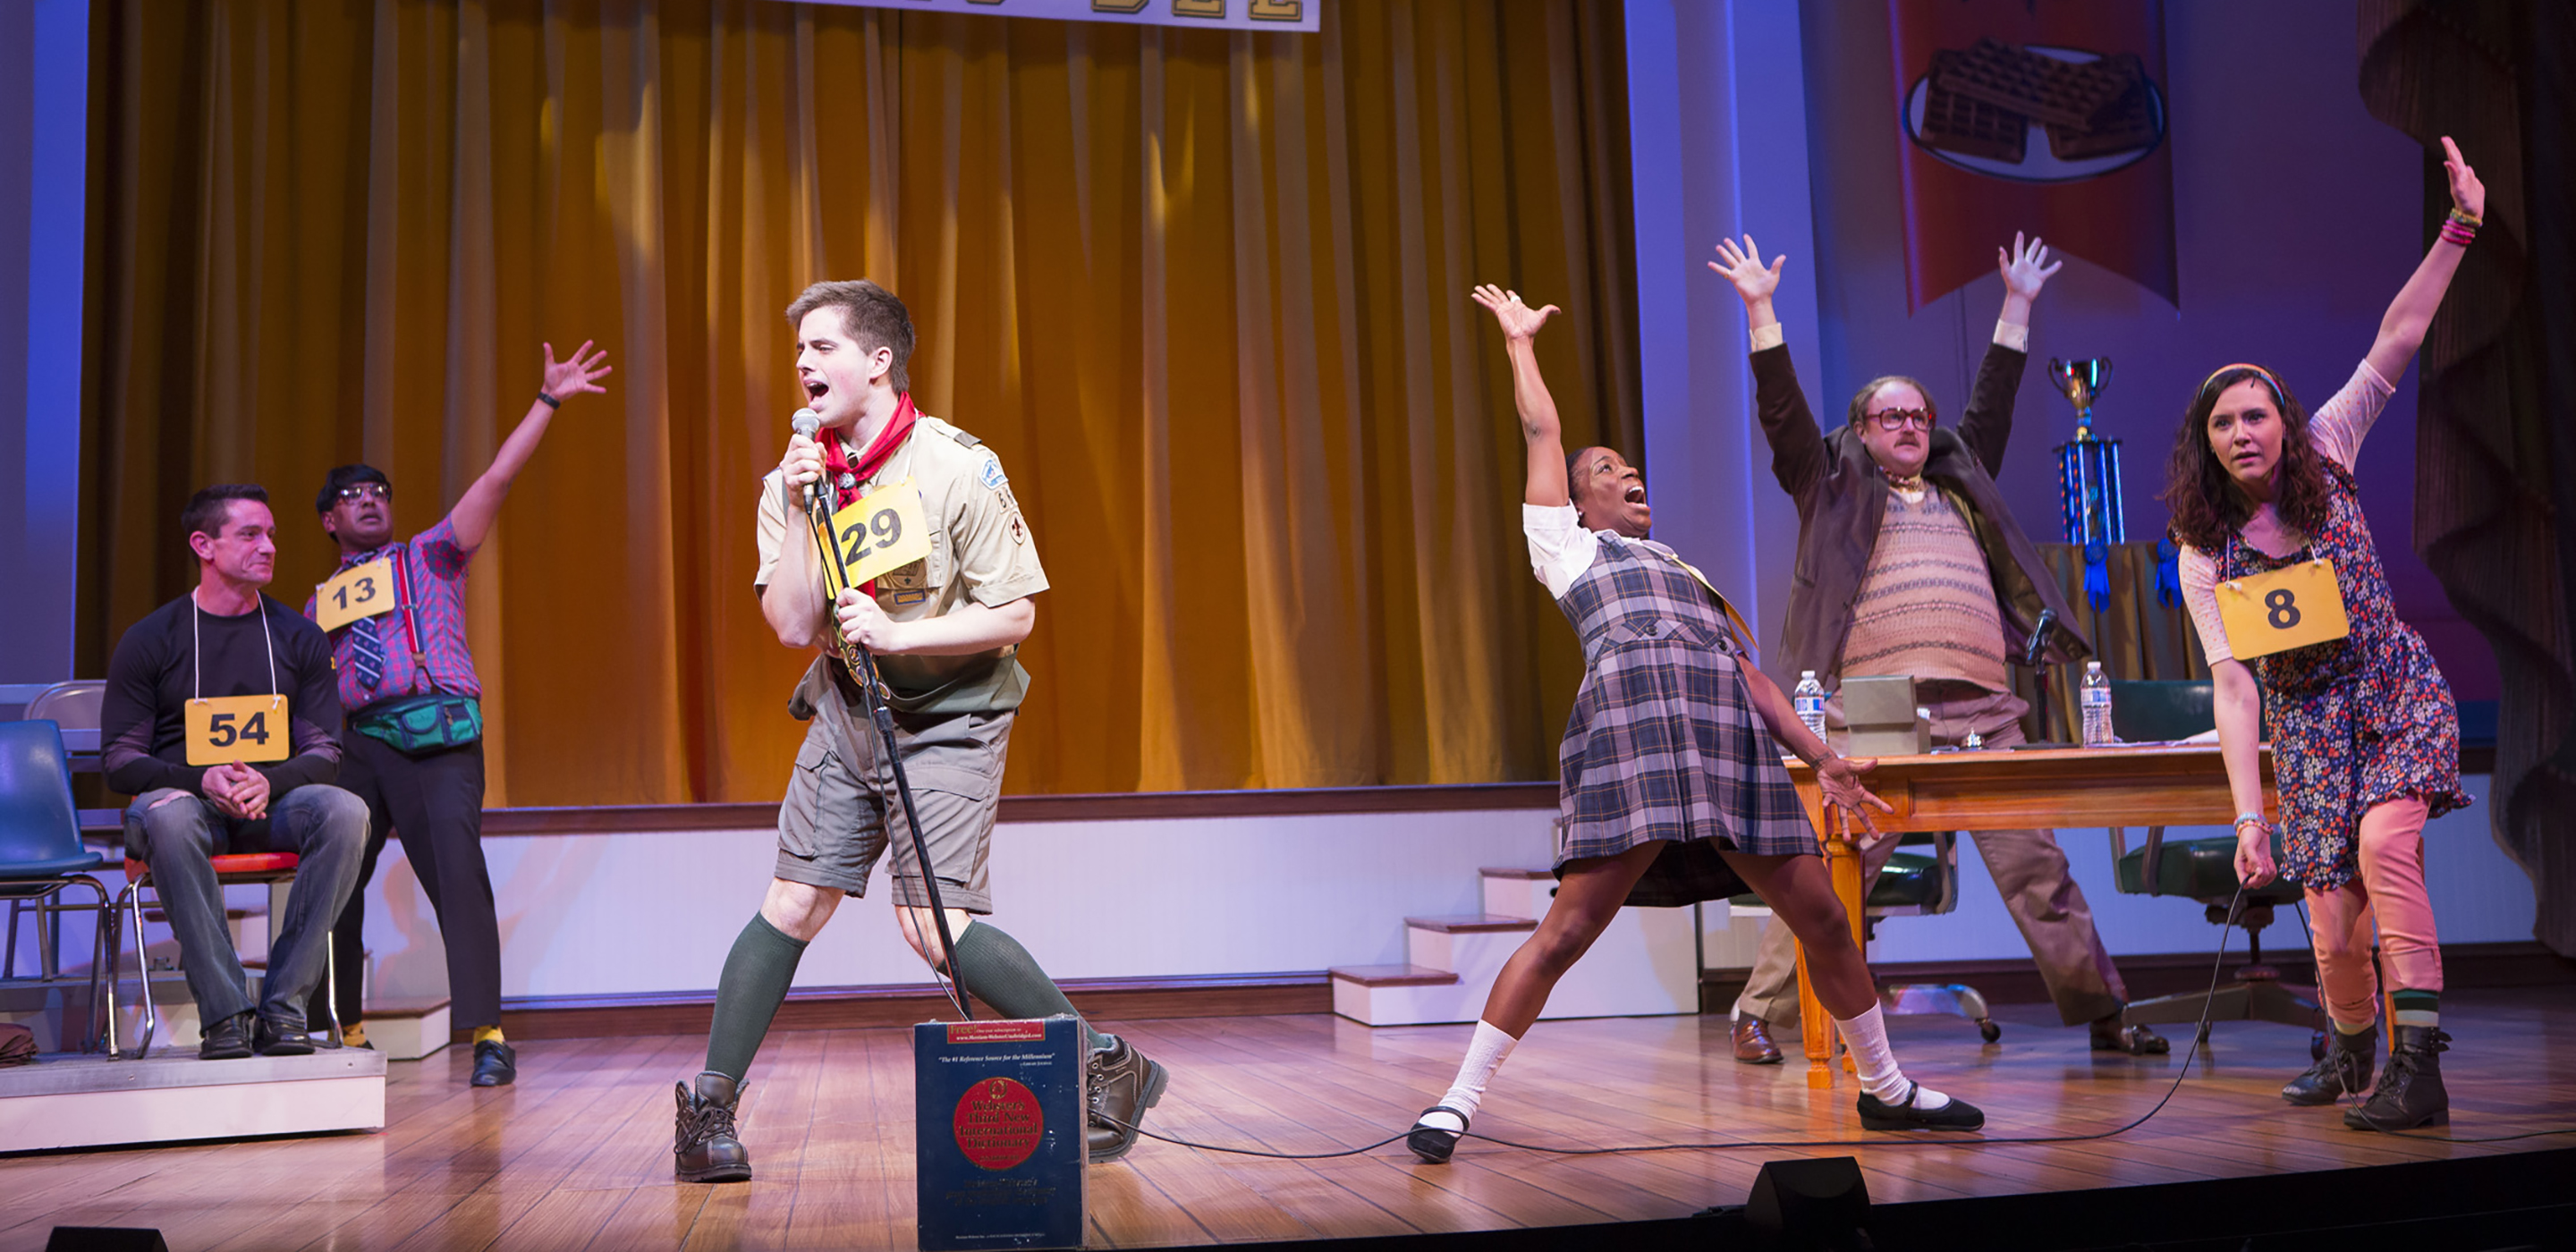 An actor in a boy scout uniform sings into a microphone on a stage. He has a placard around his neck with the number 29 written on it. Other students and teachers dance around him.